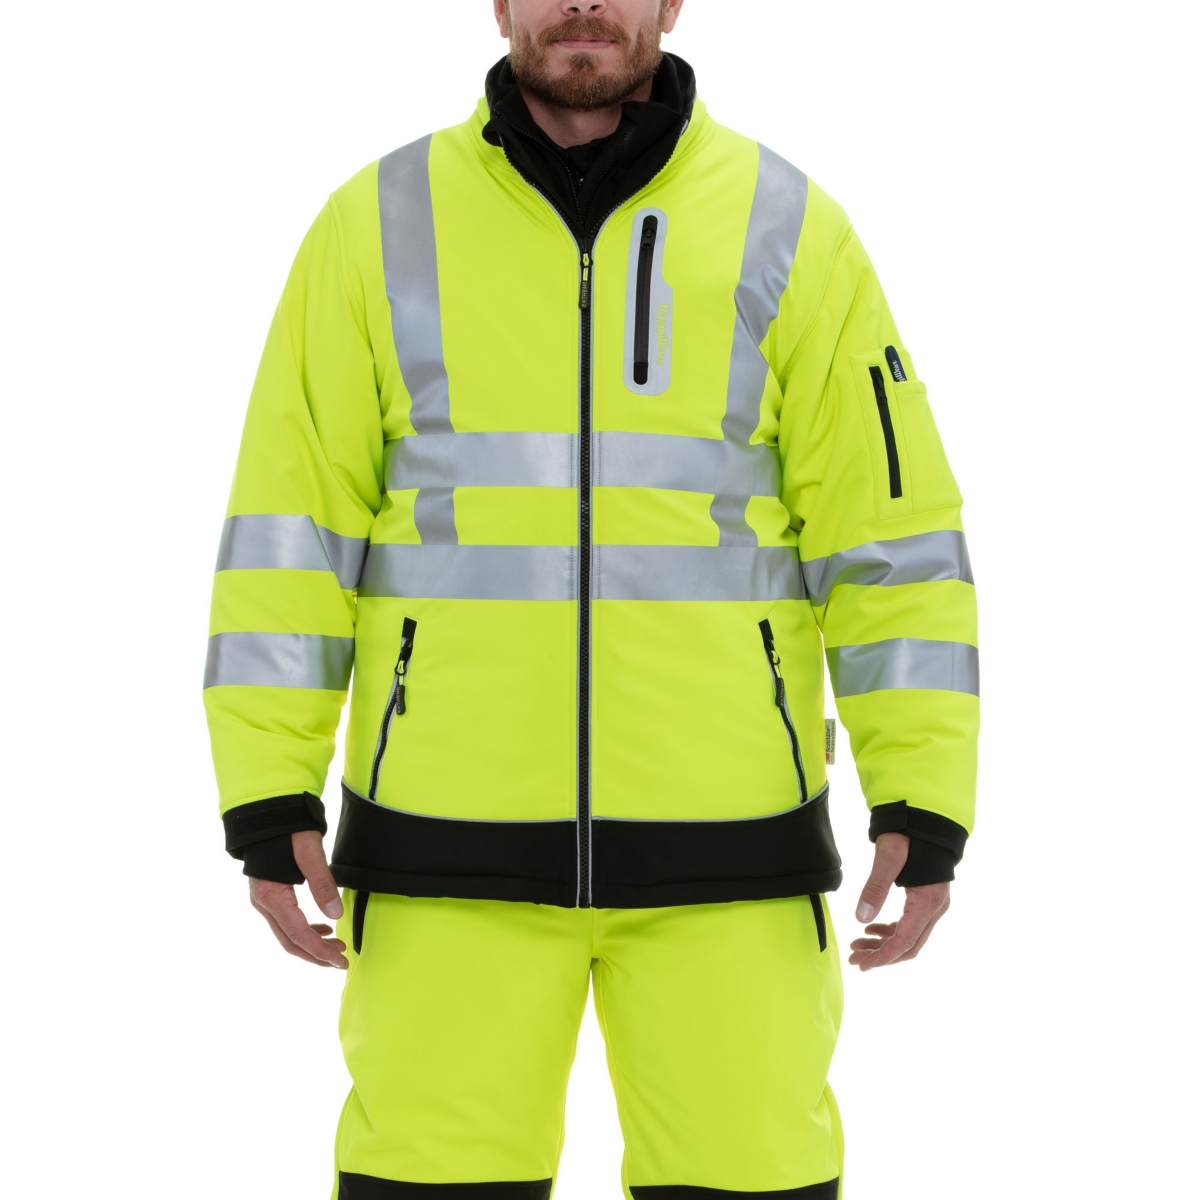 Men's Insulated HiVis Extreme Softshell Jacket with Reflective Tape - Black/Lime W/ Grey